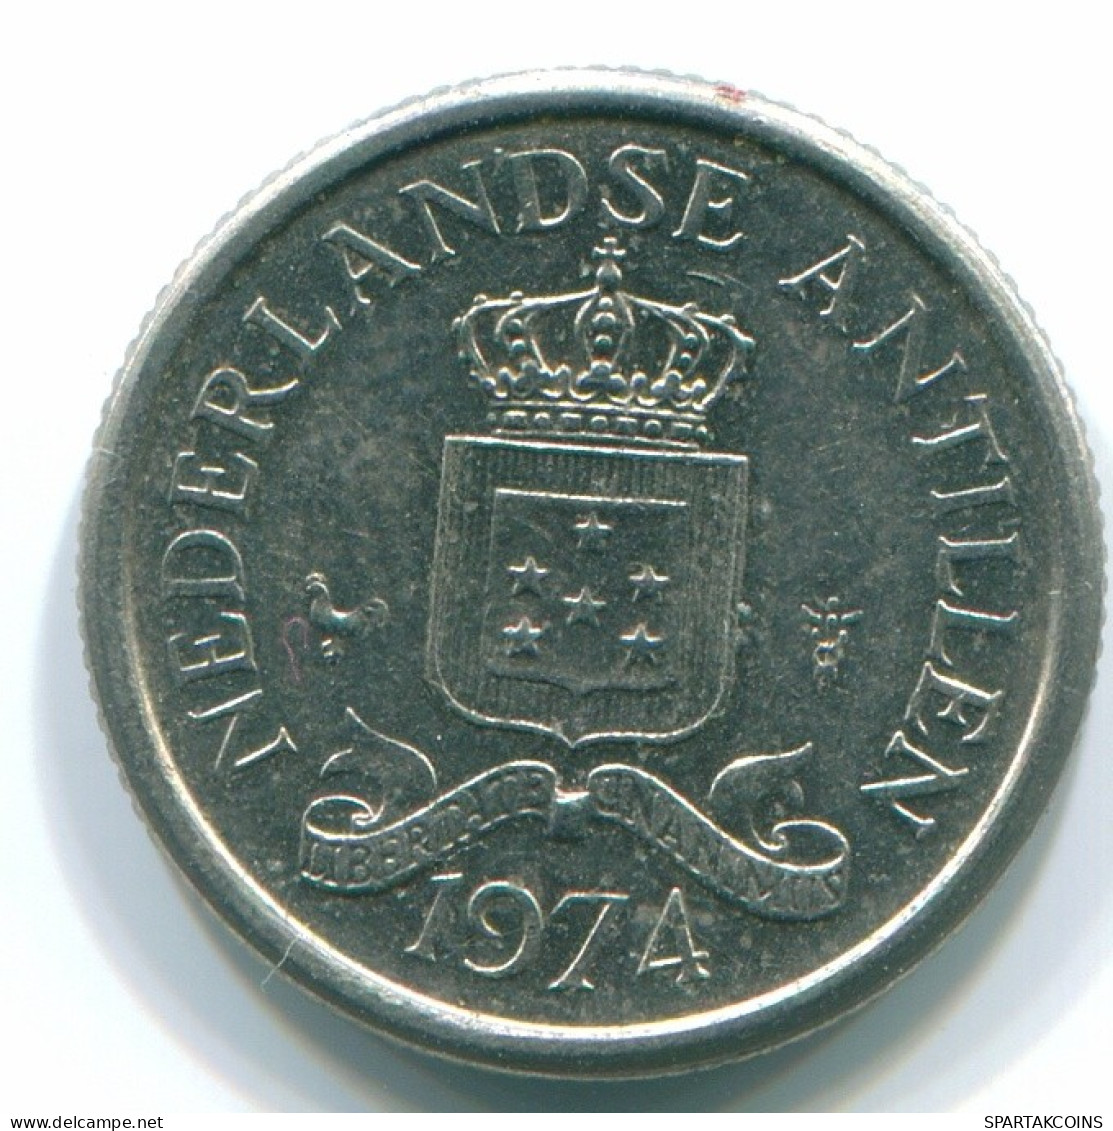 10 CENTS 1974 NETHERLANDS ANTILLES Nickel Colonial Coin #S13520.U.A - Netherlands Antilles